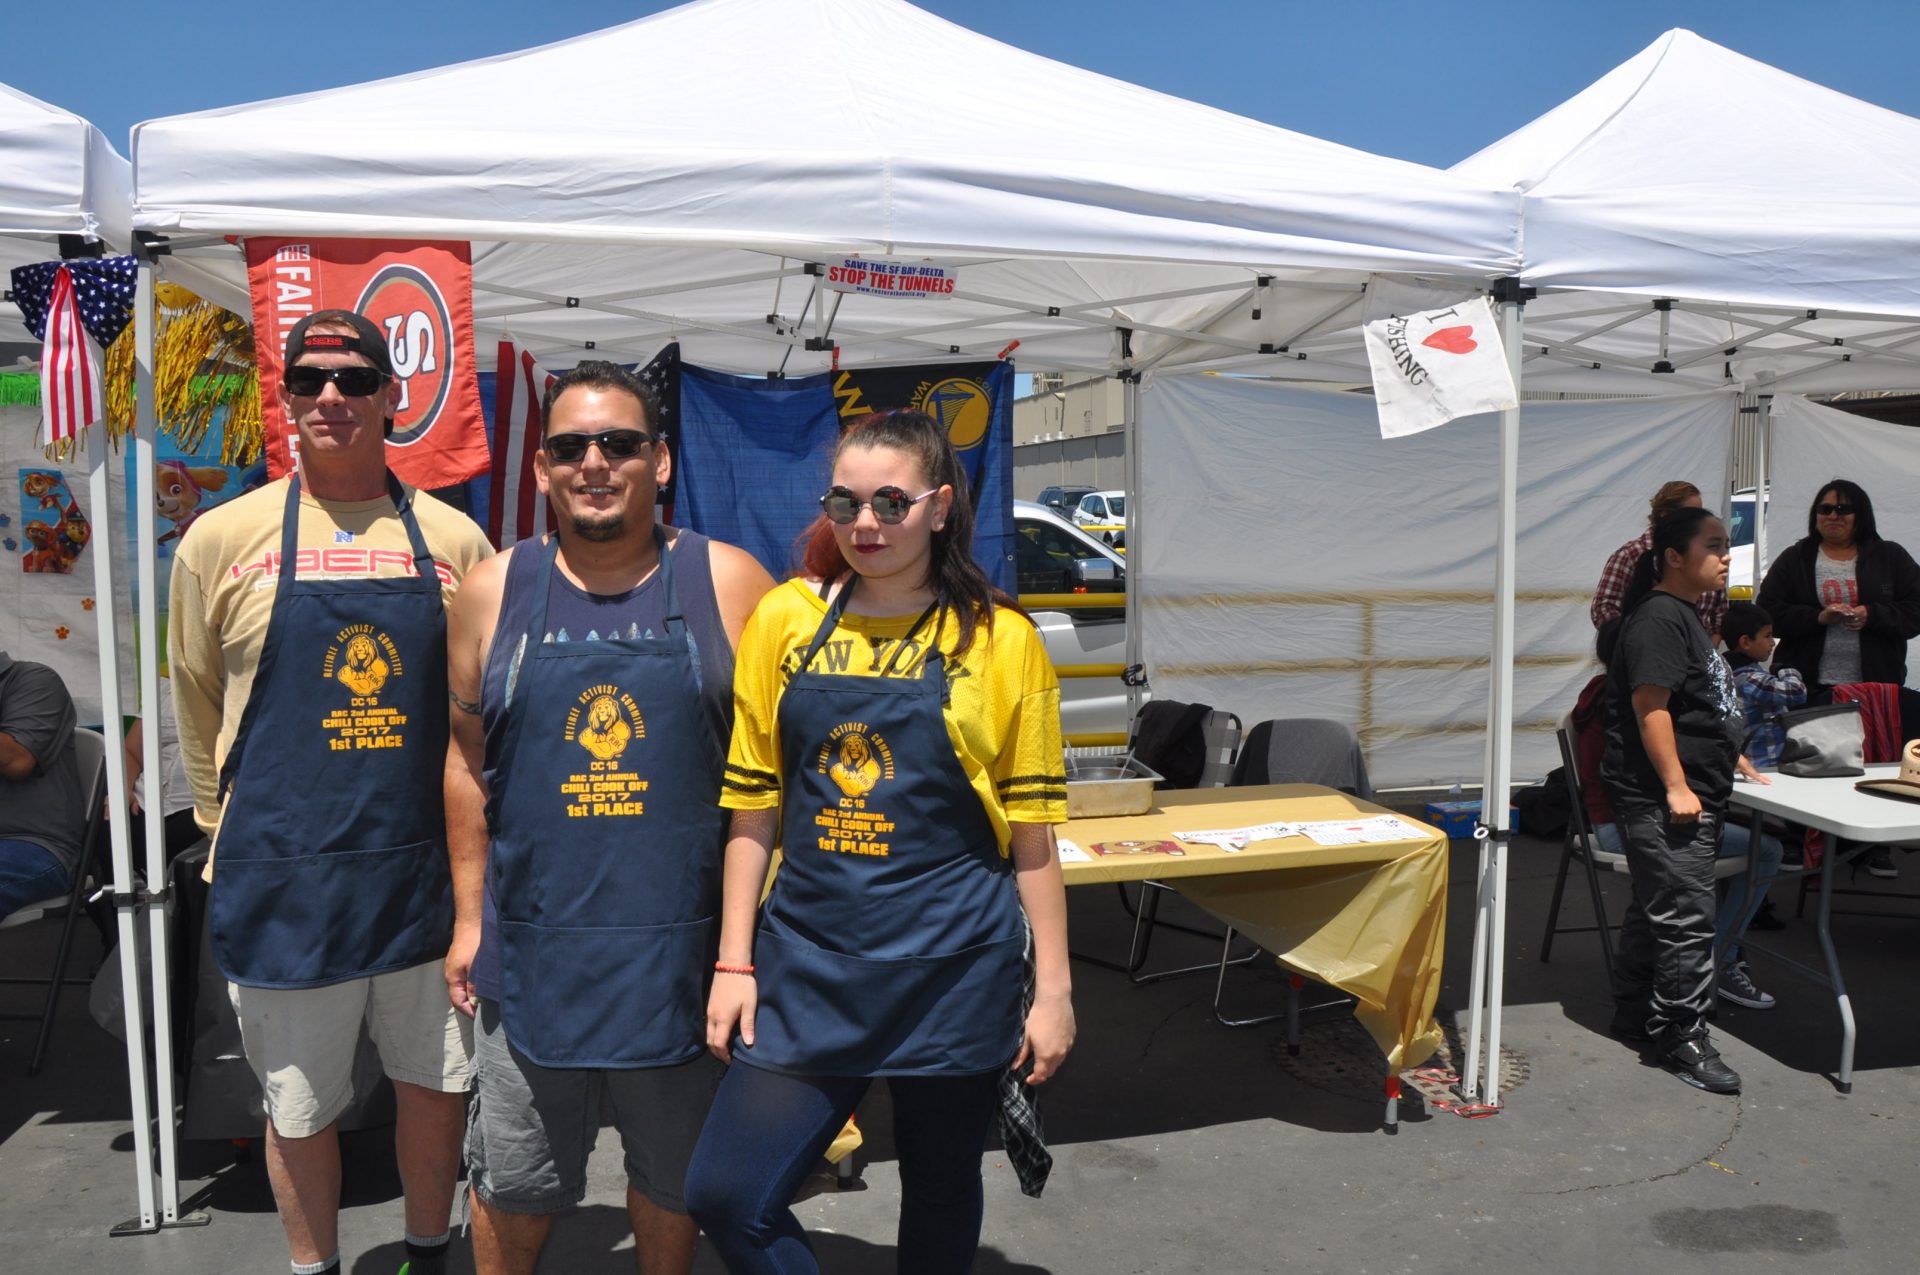 Image from the Gallery: Car Show & Chili Cook Off – San Leandro, CA